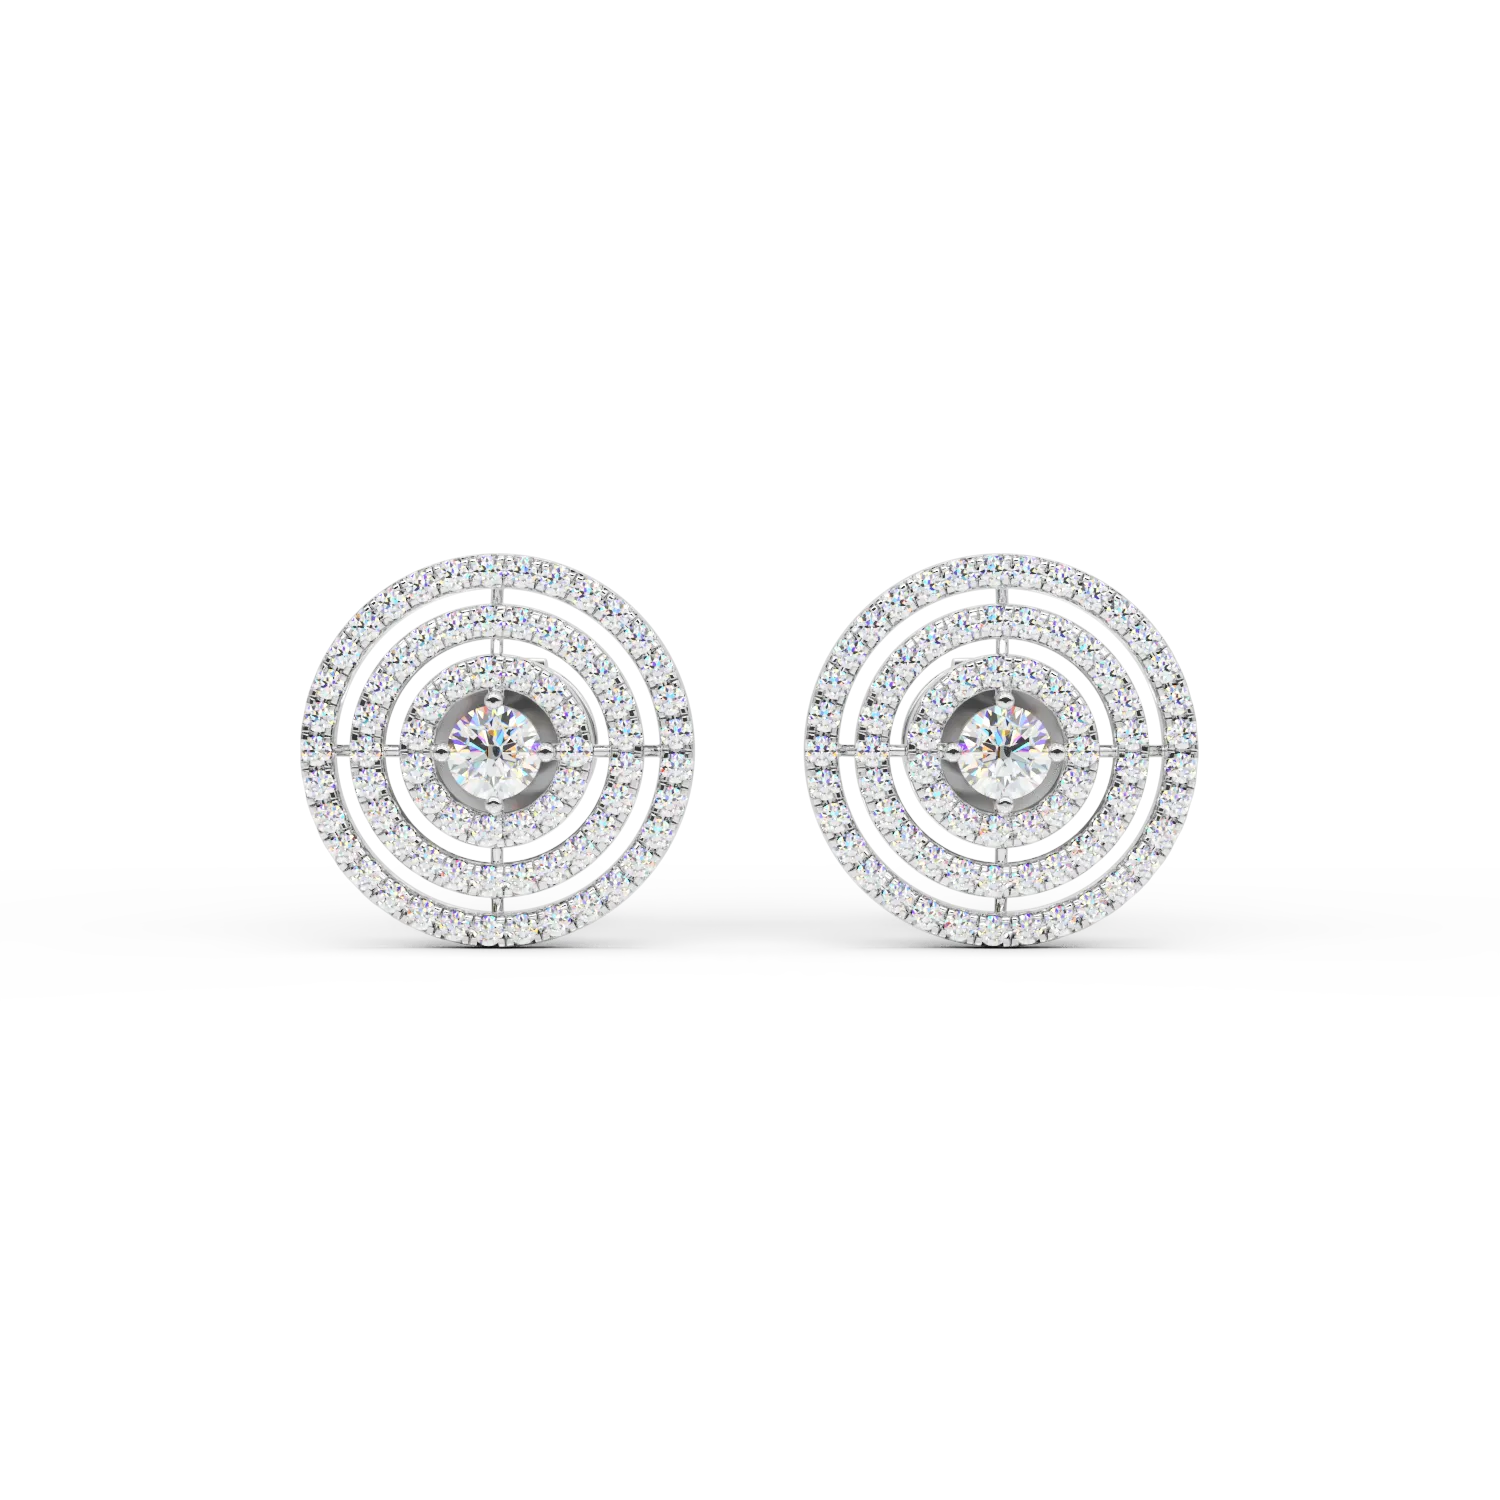 18K white gold earrings with 0.56ct diamonds